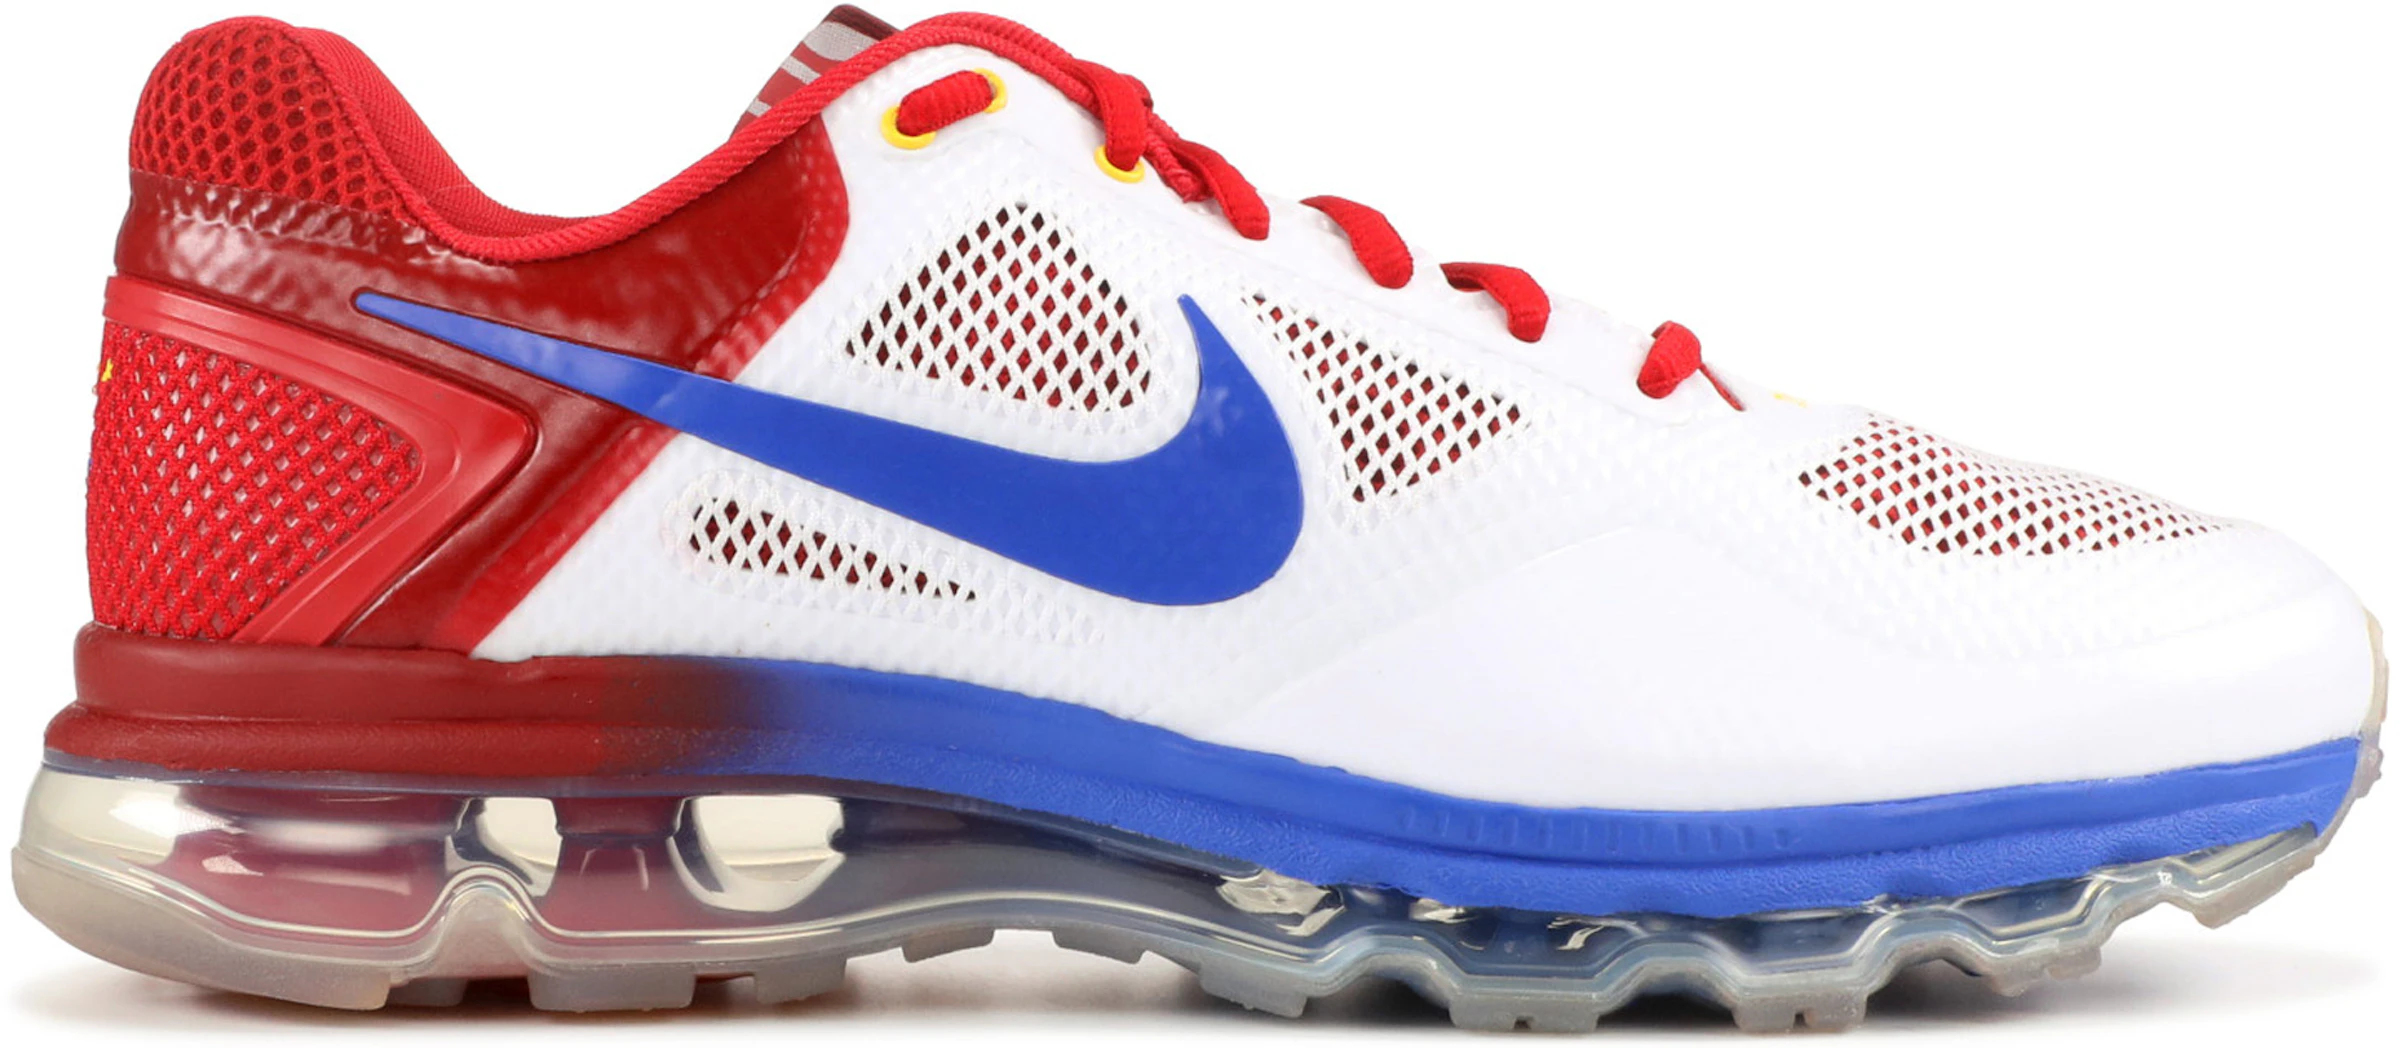 Introducir 63+ imagen manny pacquiao nike shoes - Abzlocal.mx